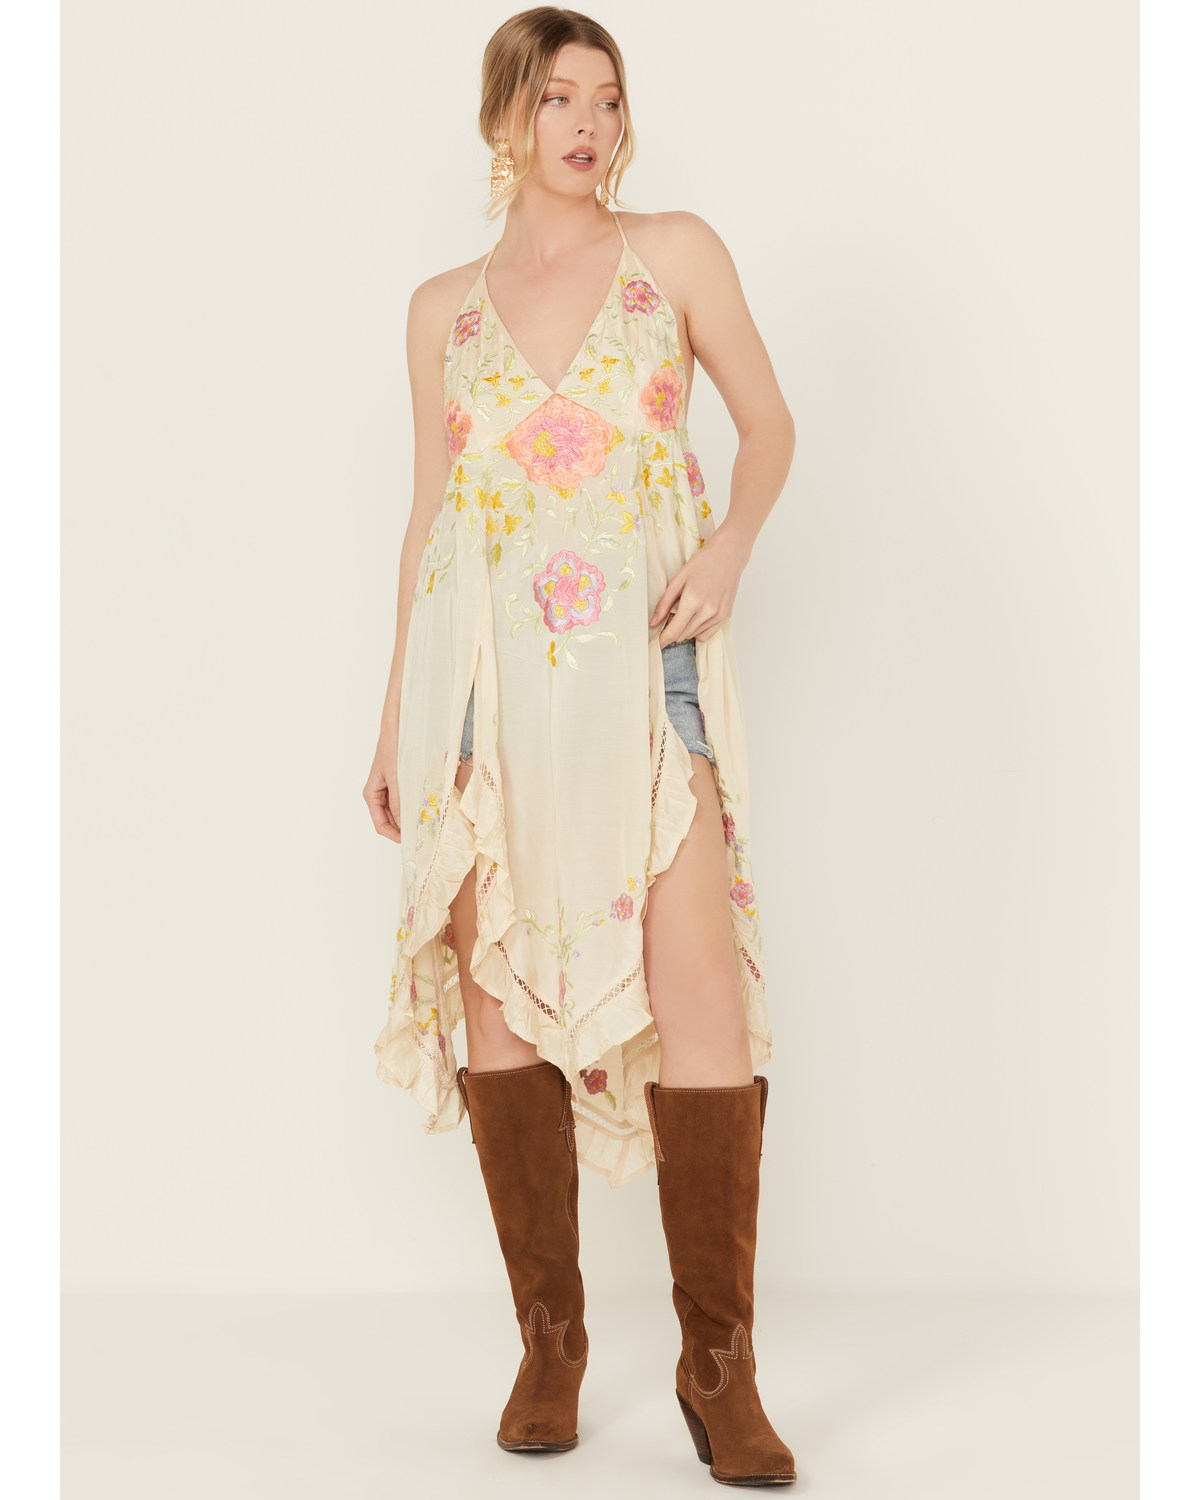 Free People Women's Full Bloom Floral Embroidered Long Tank Top